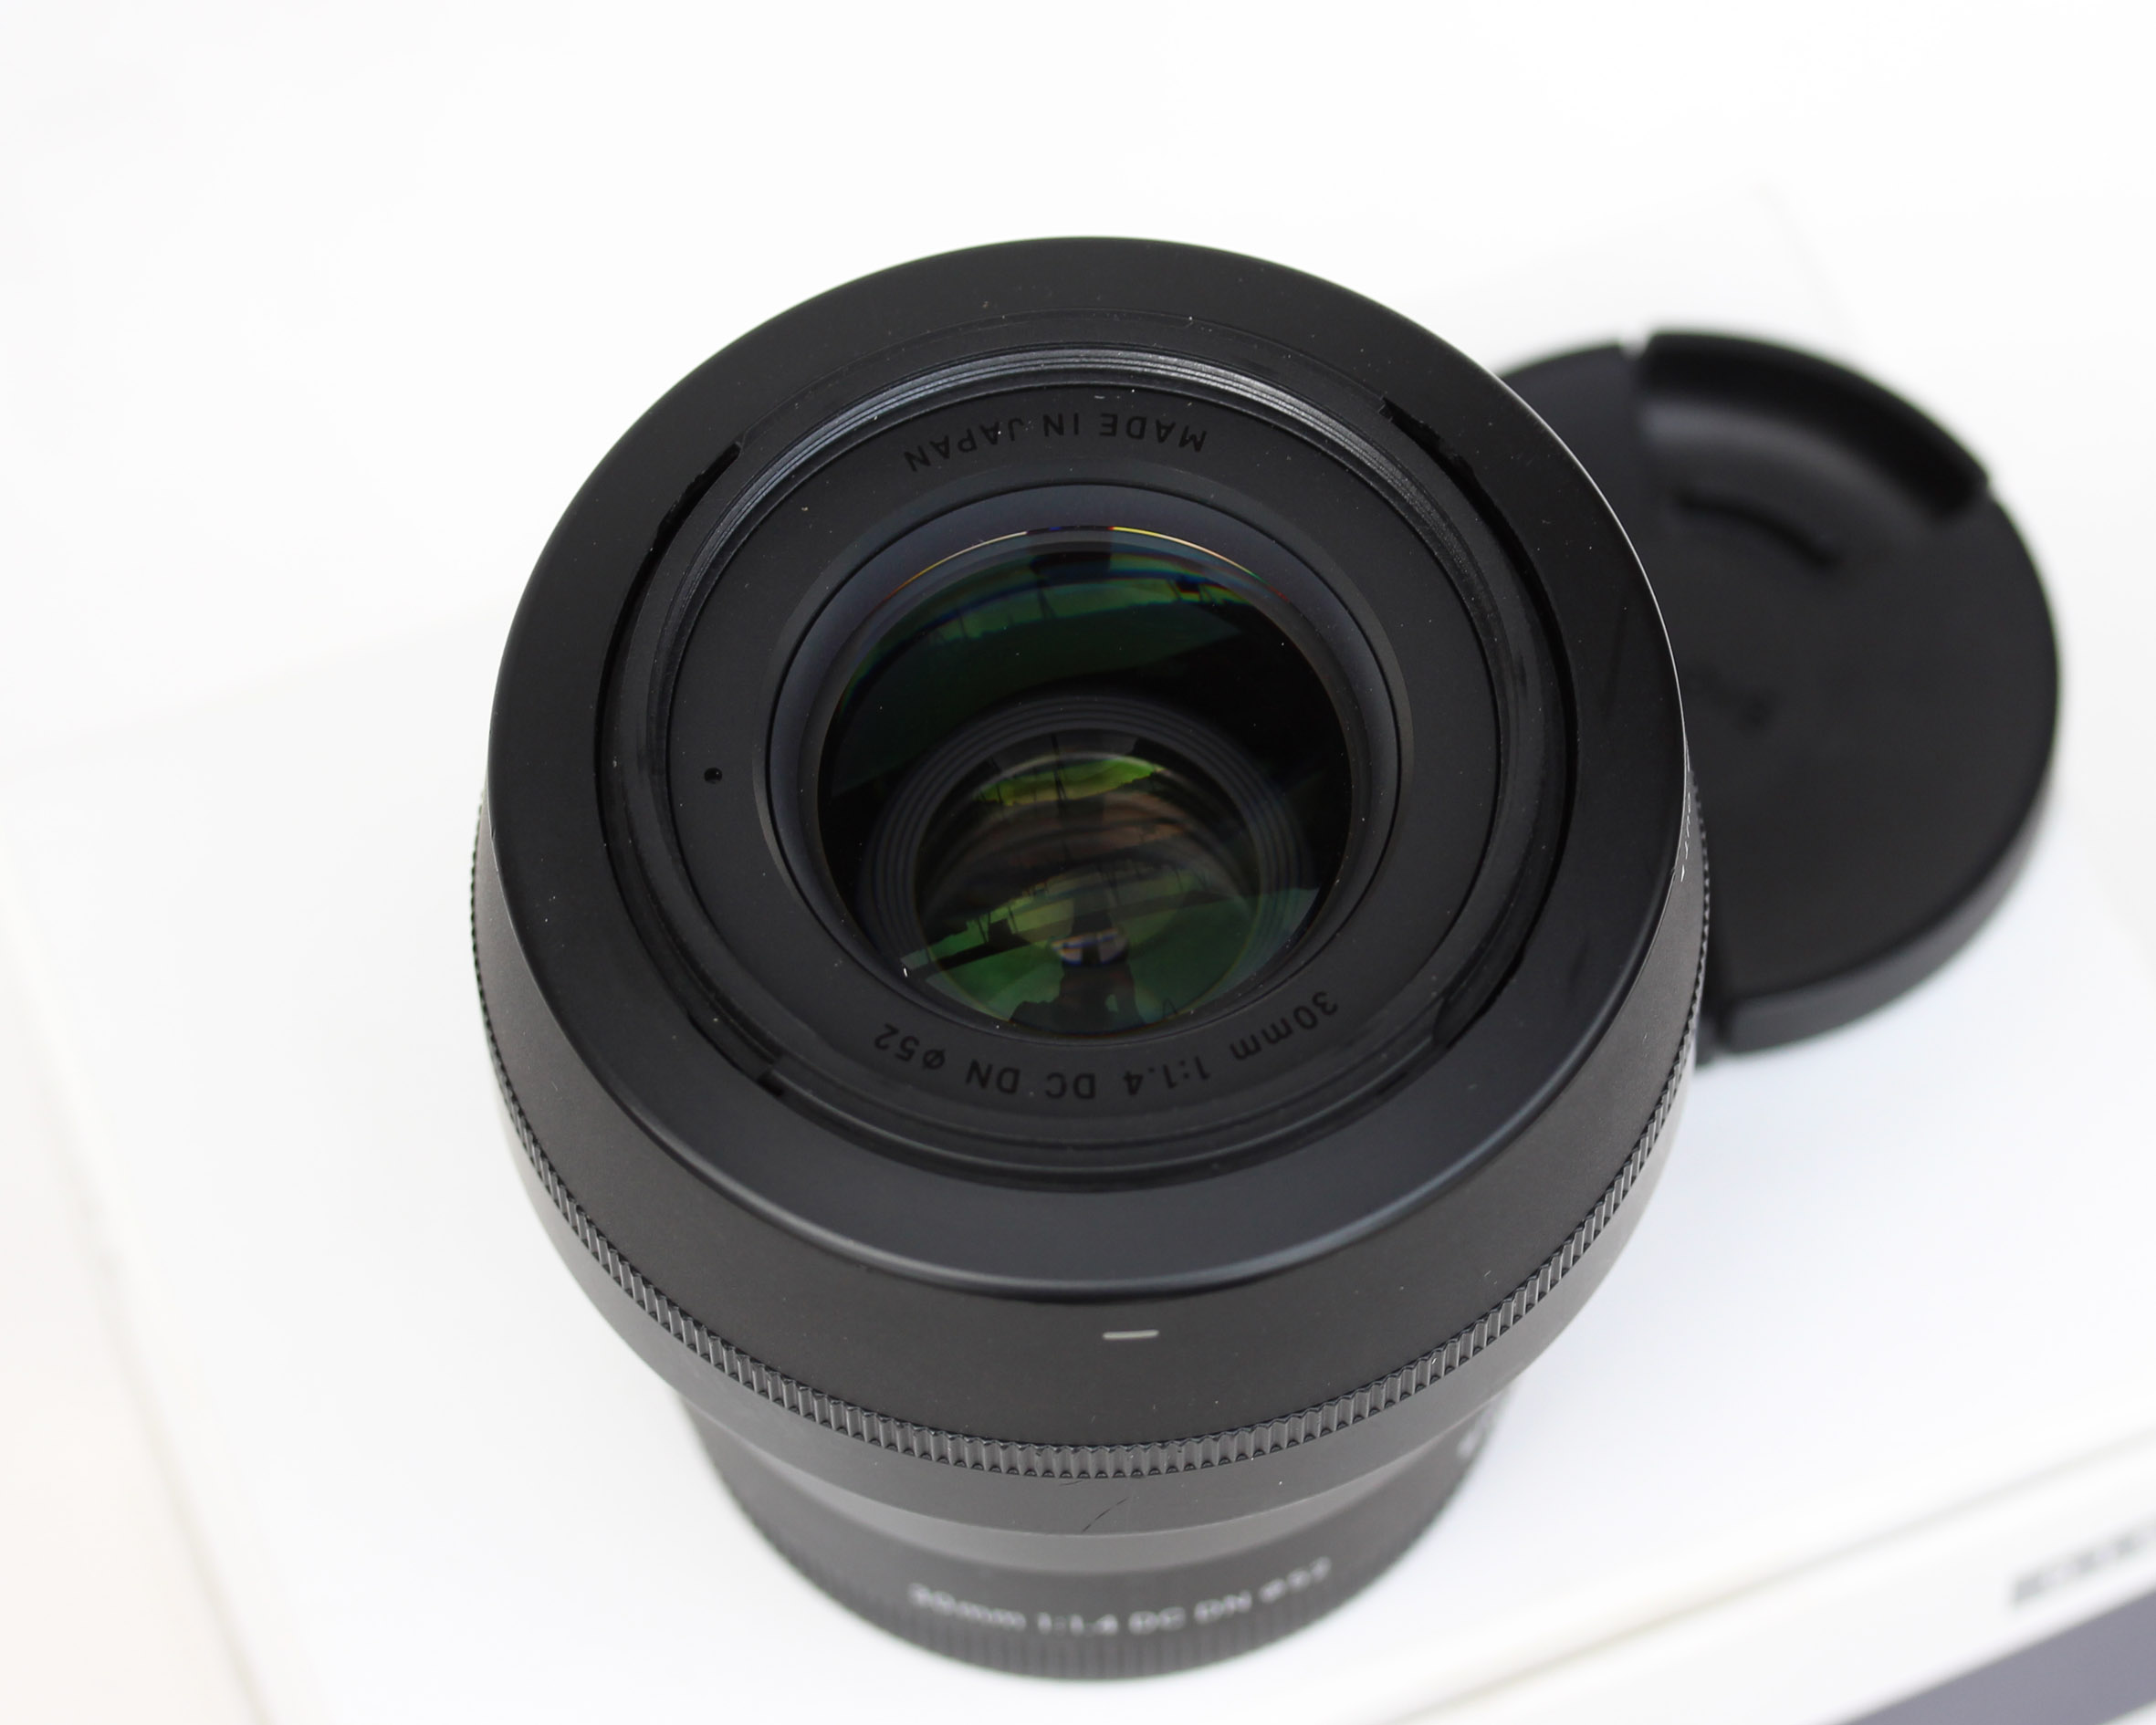 Sigma 30mm f/1.4 DC DN for Sony E Mount